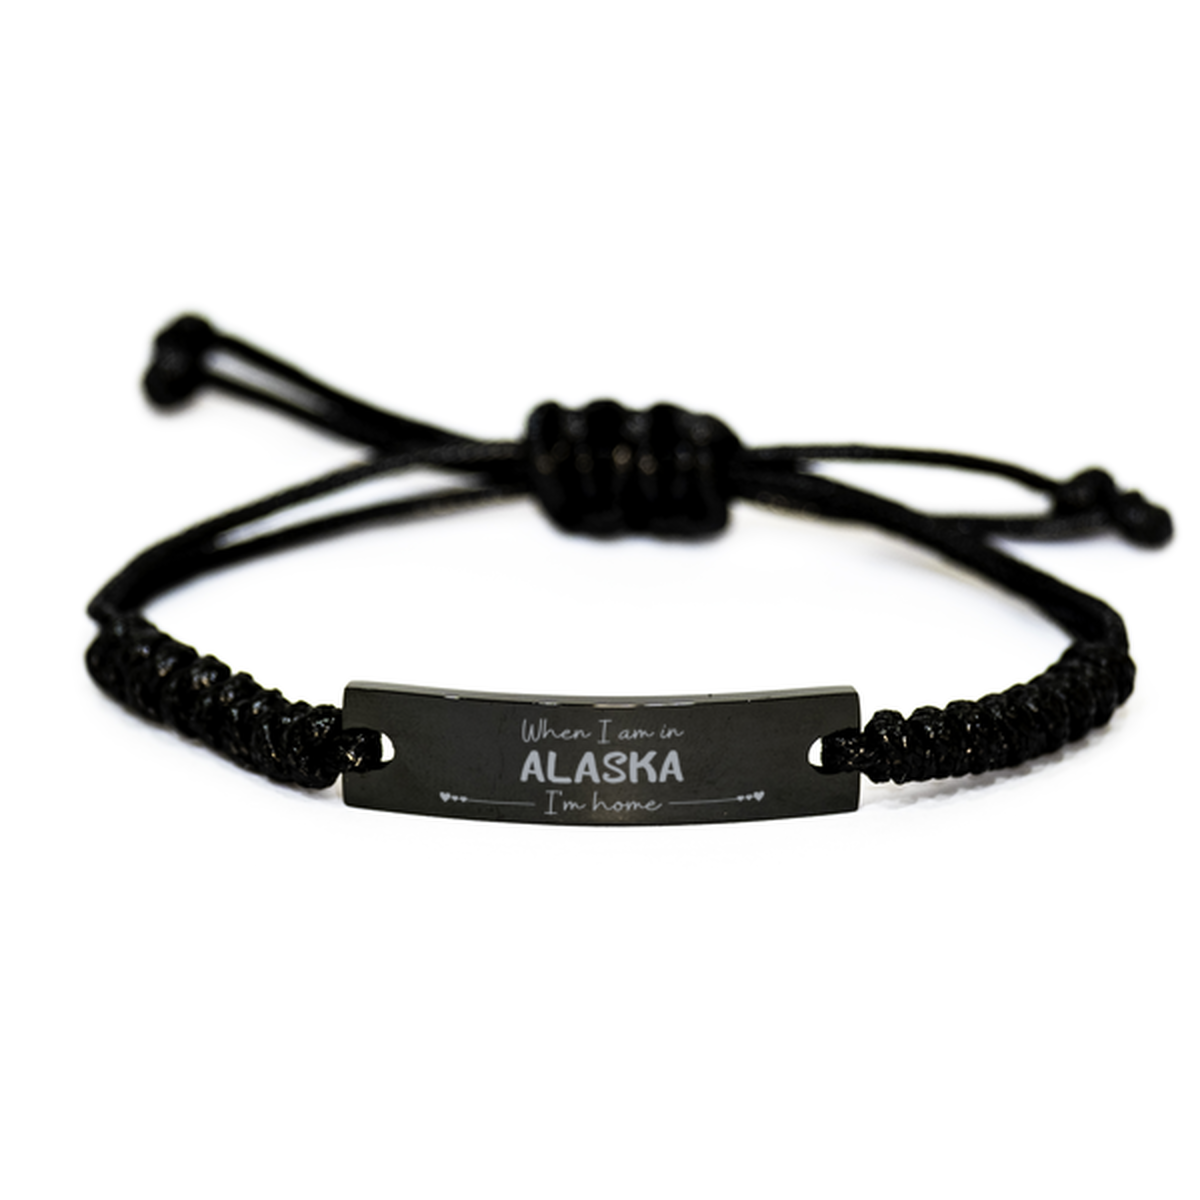 When I am in Alaska I'm home Black Rope Bracelet, Cheap Gifts For Alaska, State Alaska Birthday Gifts for Friends Coworker